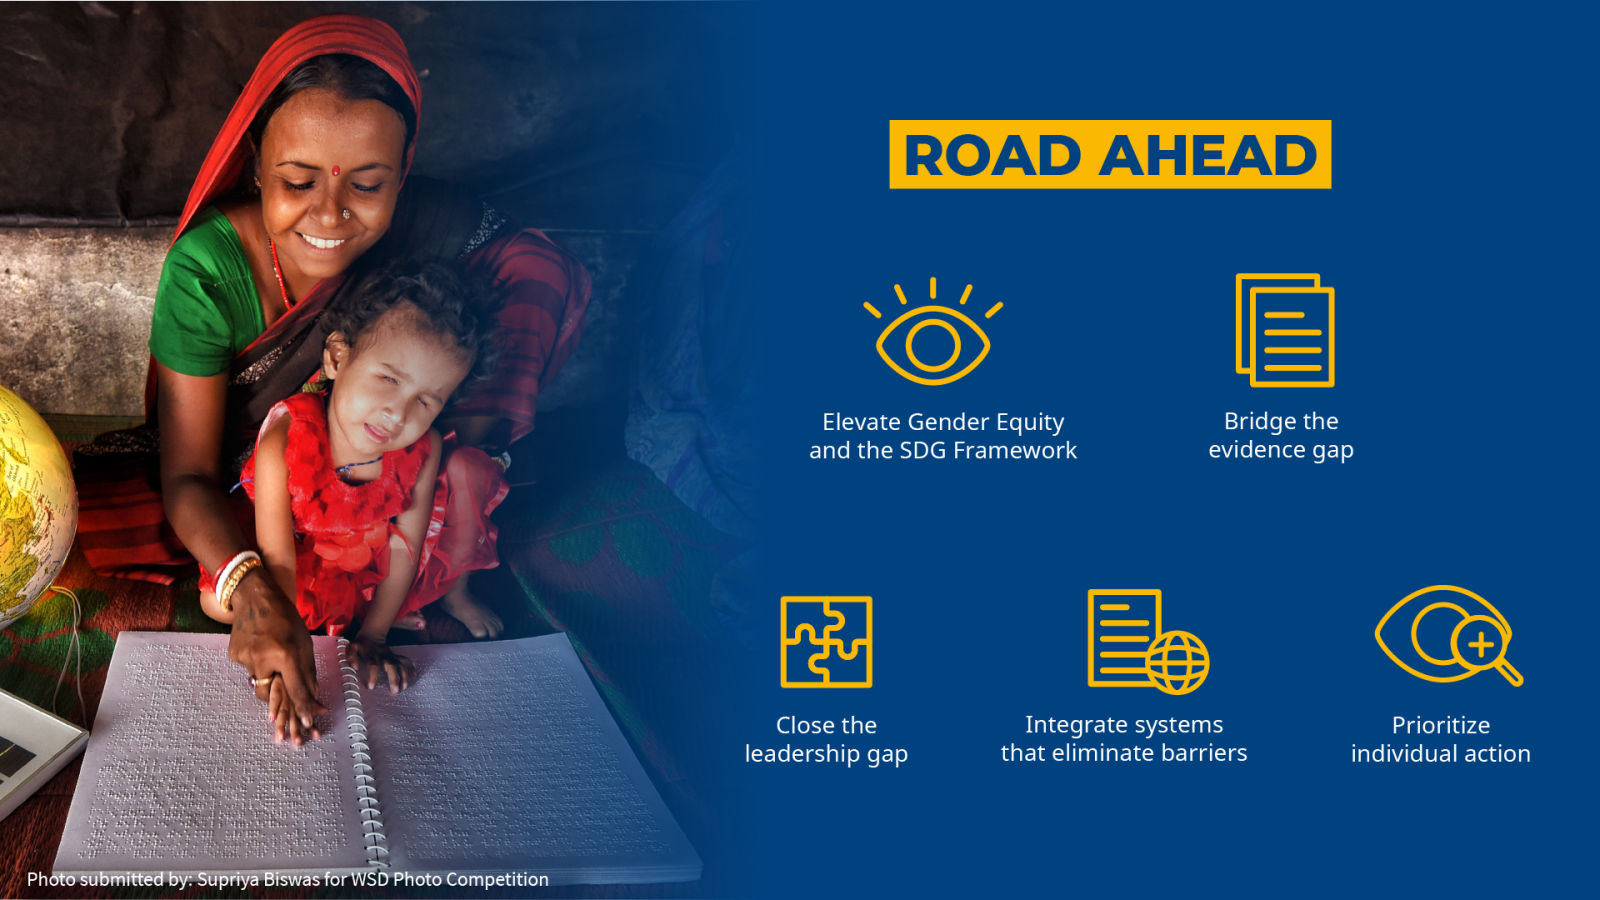 Road Ahead Elevate Género Equity and the SDG Framework Bridge the evidence gap Close the leadership gap Integrate systems that eliminate barriers Prioritize individual action